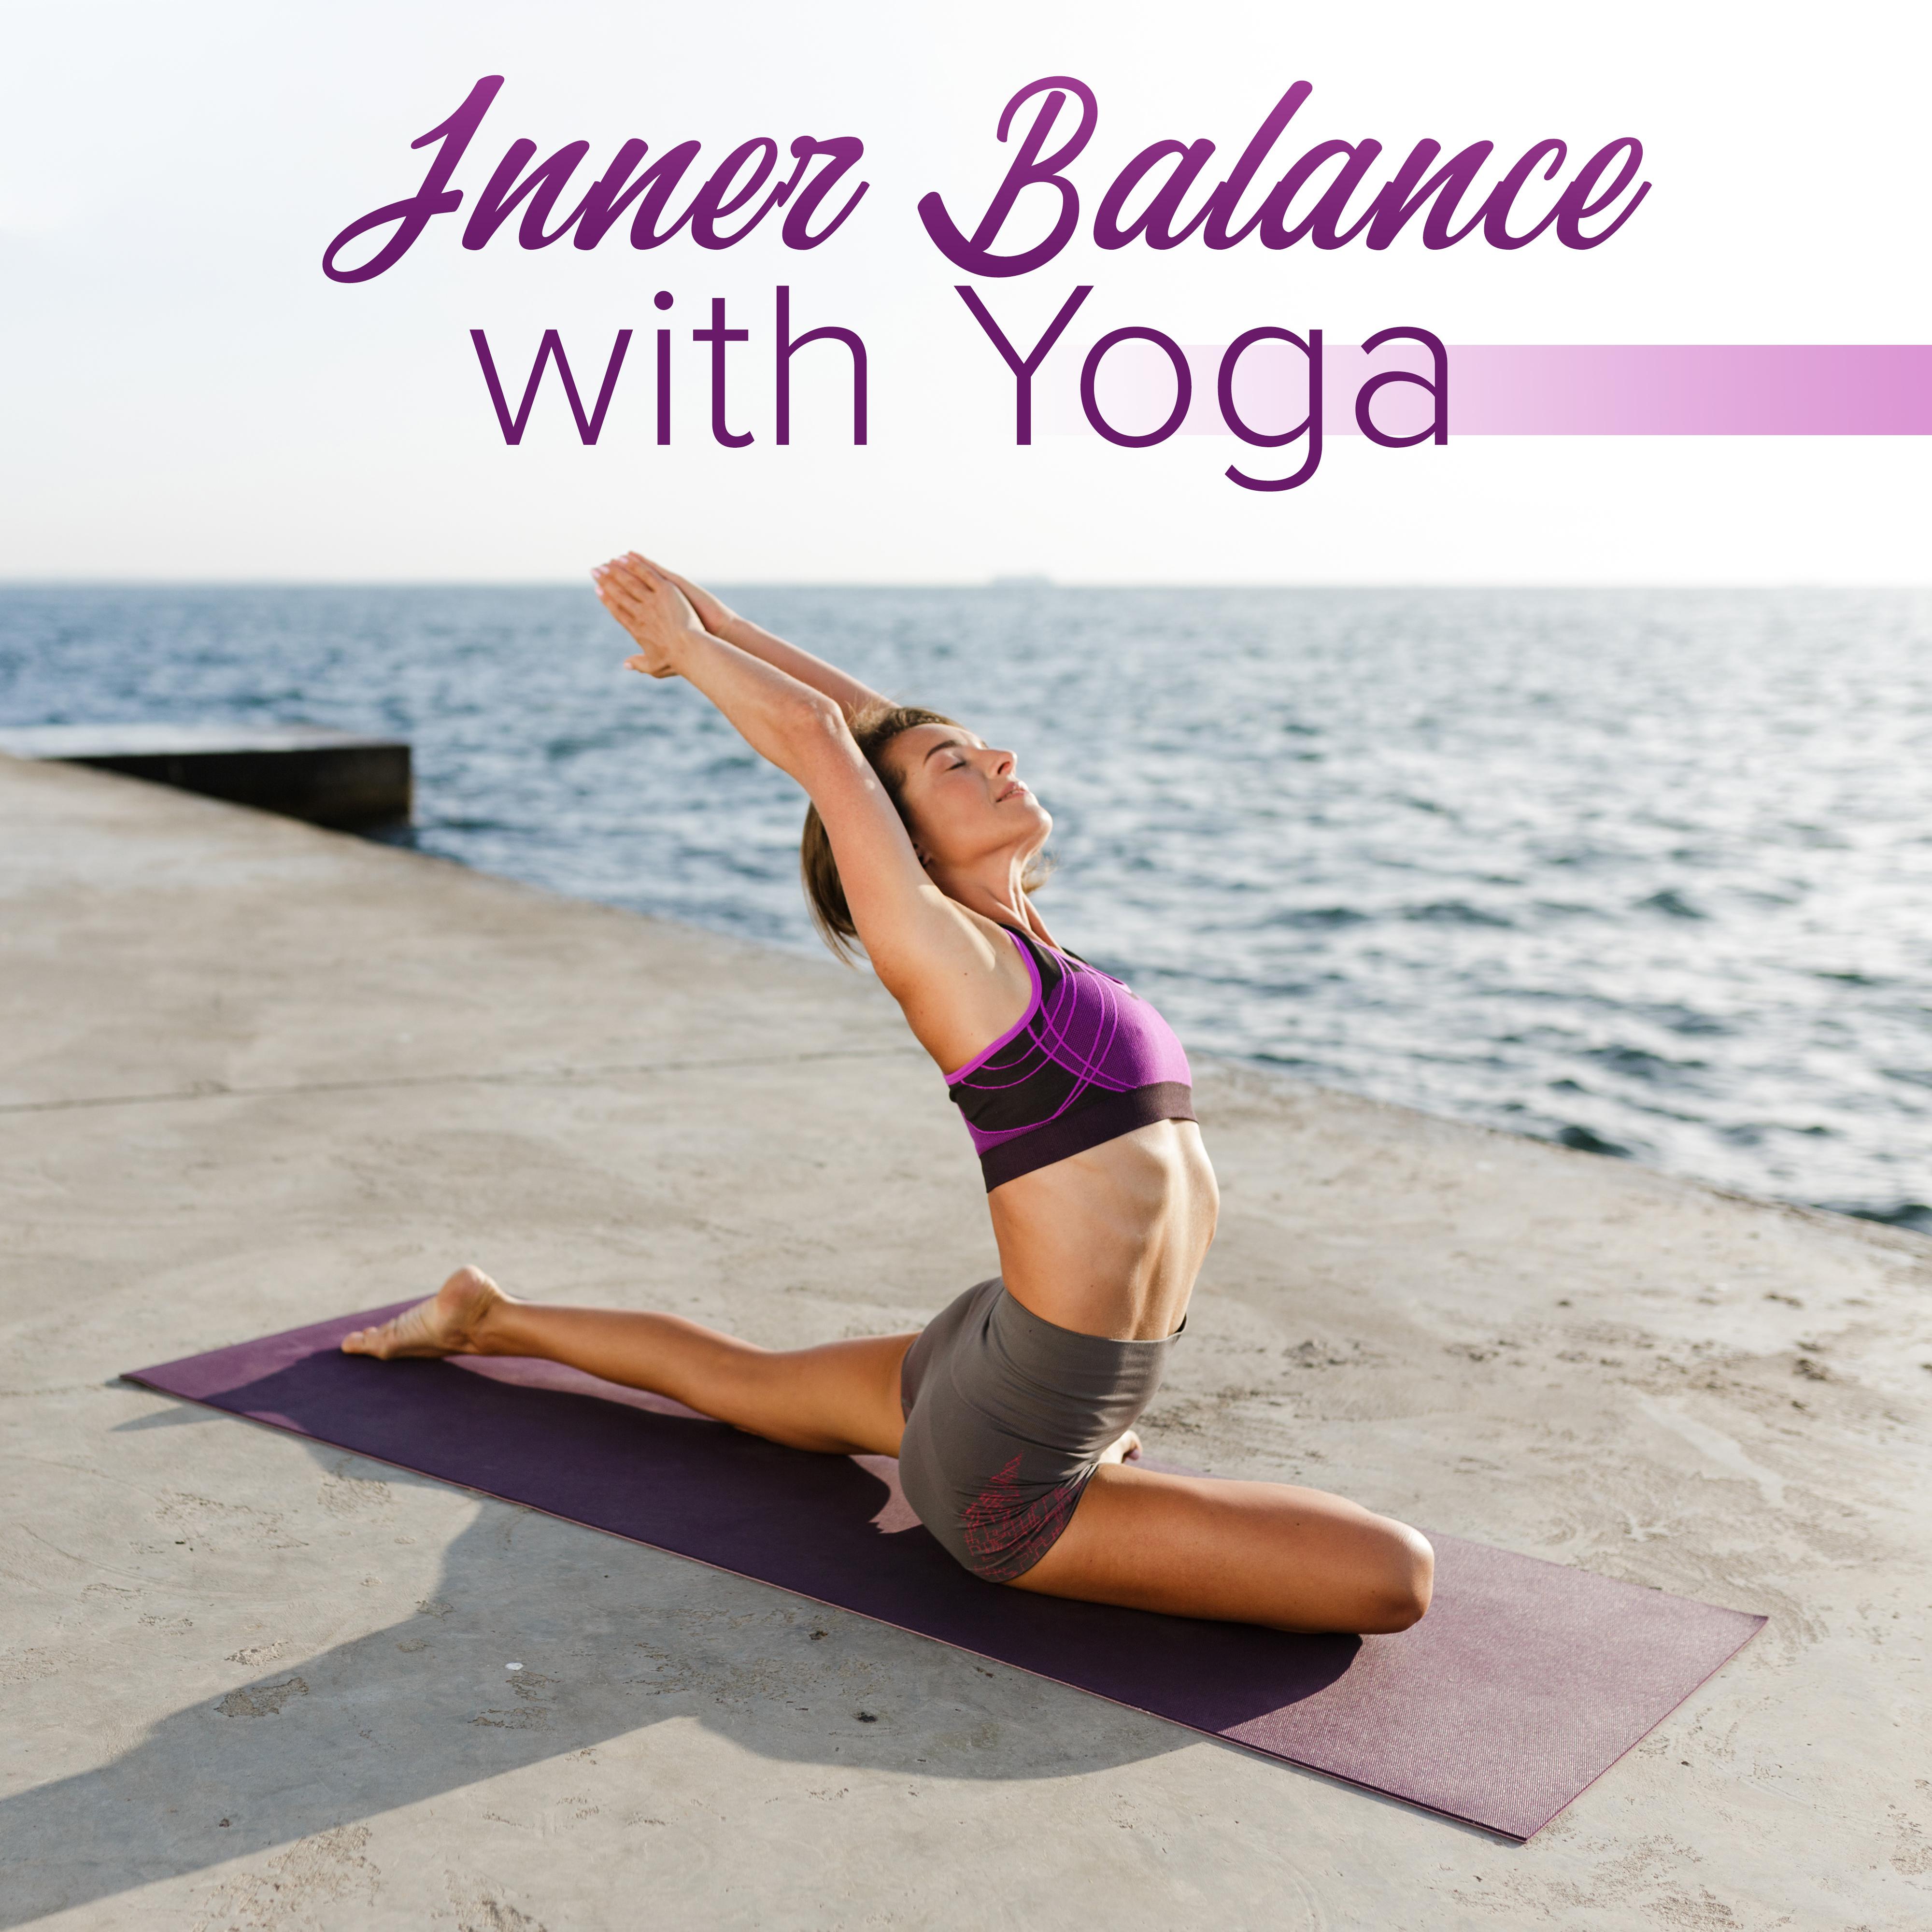 Inner Balance with Yoga – Chakra Balancing, Tranquil Peace, Healing Music for Deep Meditation, Relaxation, Zen Serenity, Lounge Music